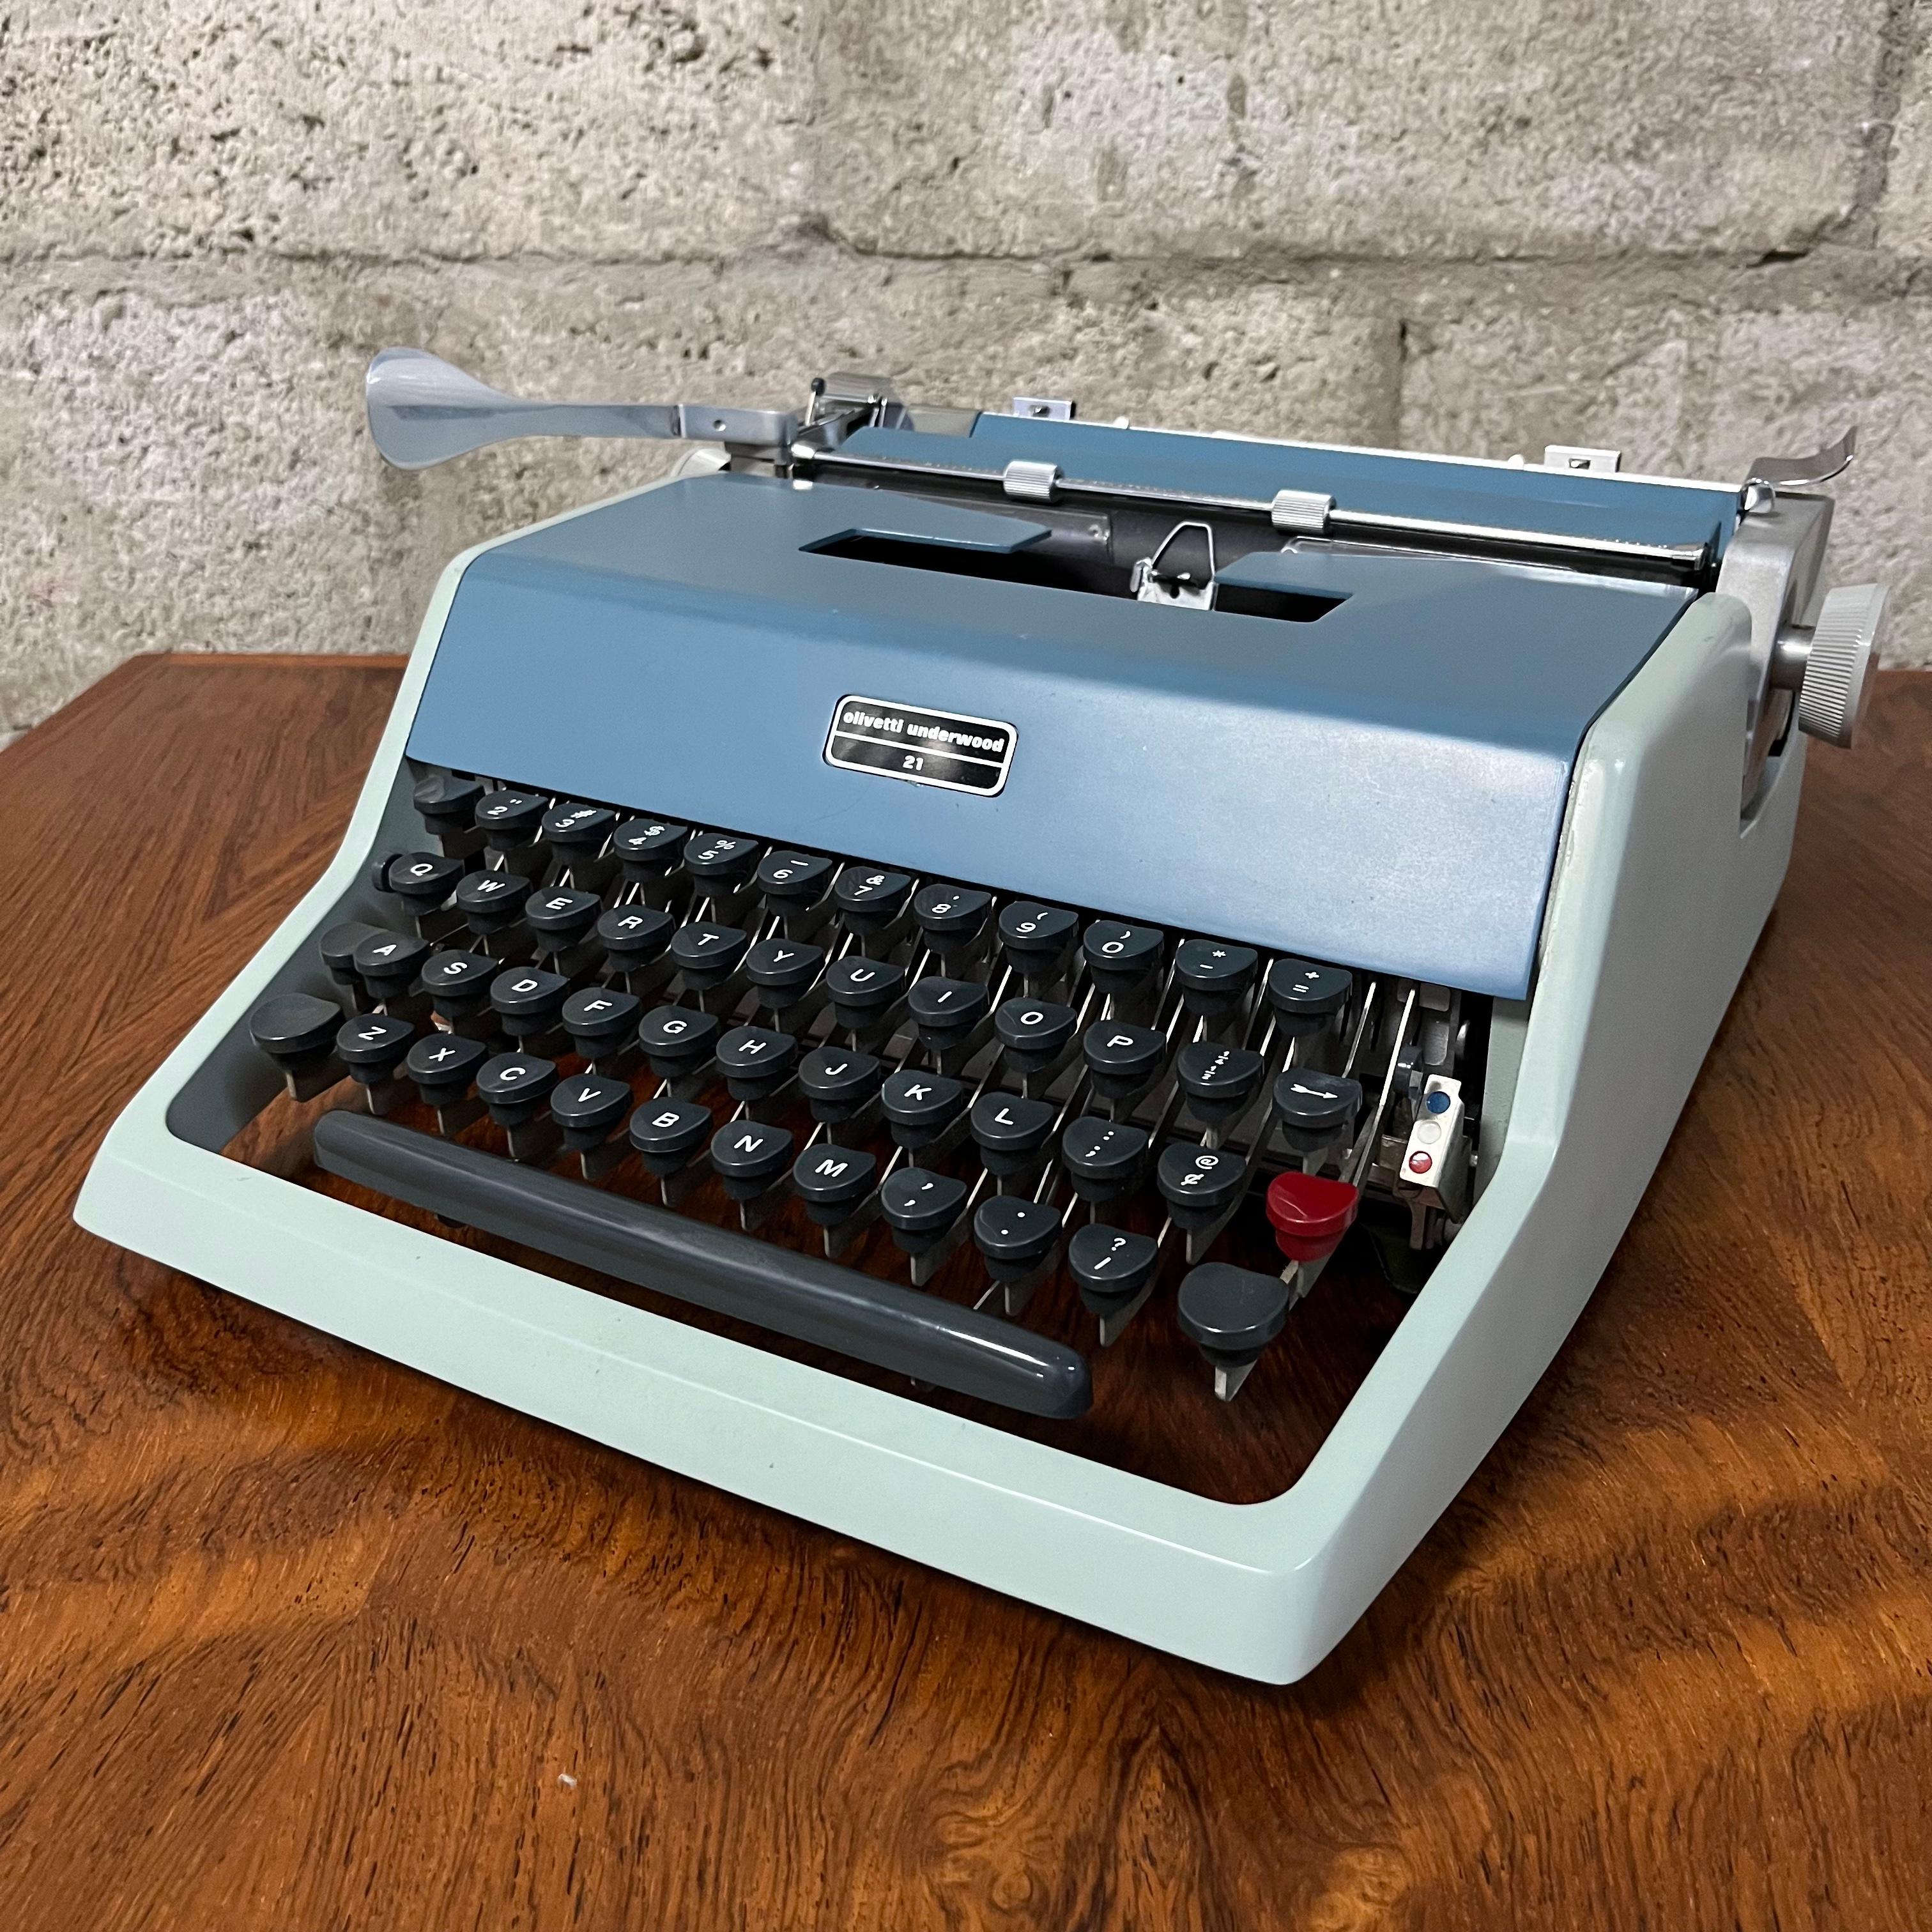 1960s Olivetti Underwood 21 Portable Typewriter With Original Travel Case For Sale 1